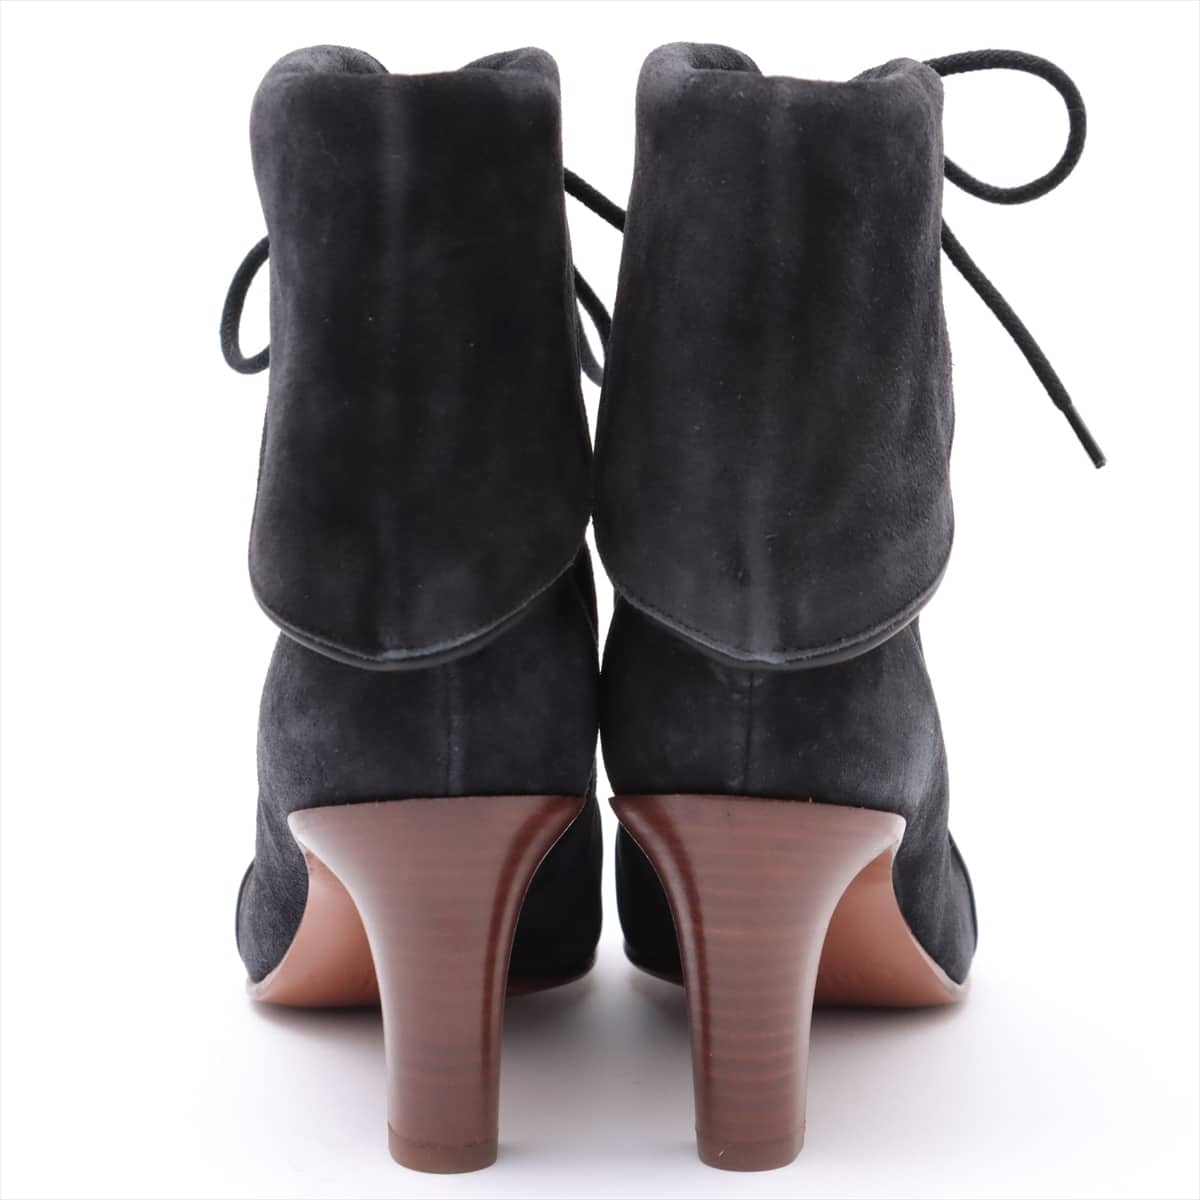 Chloe Suede & leather Short Boots 36 Ladies' Black x Gray